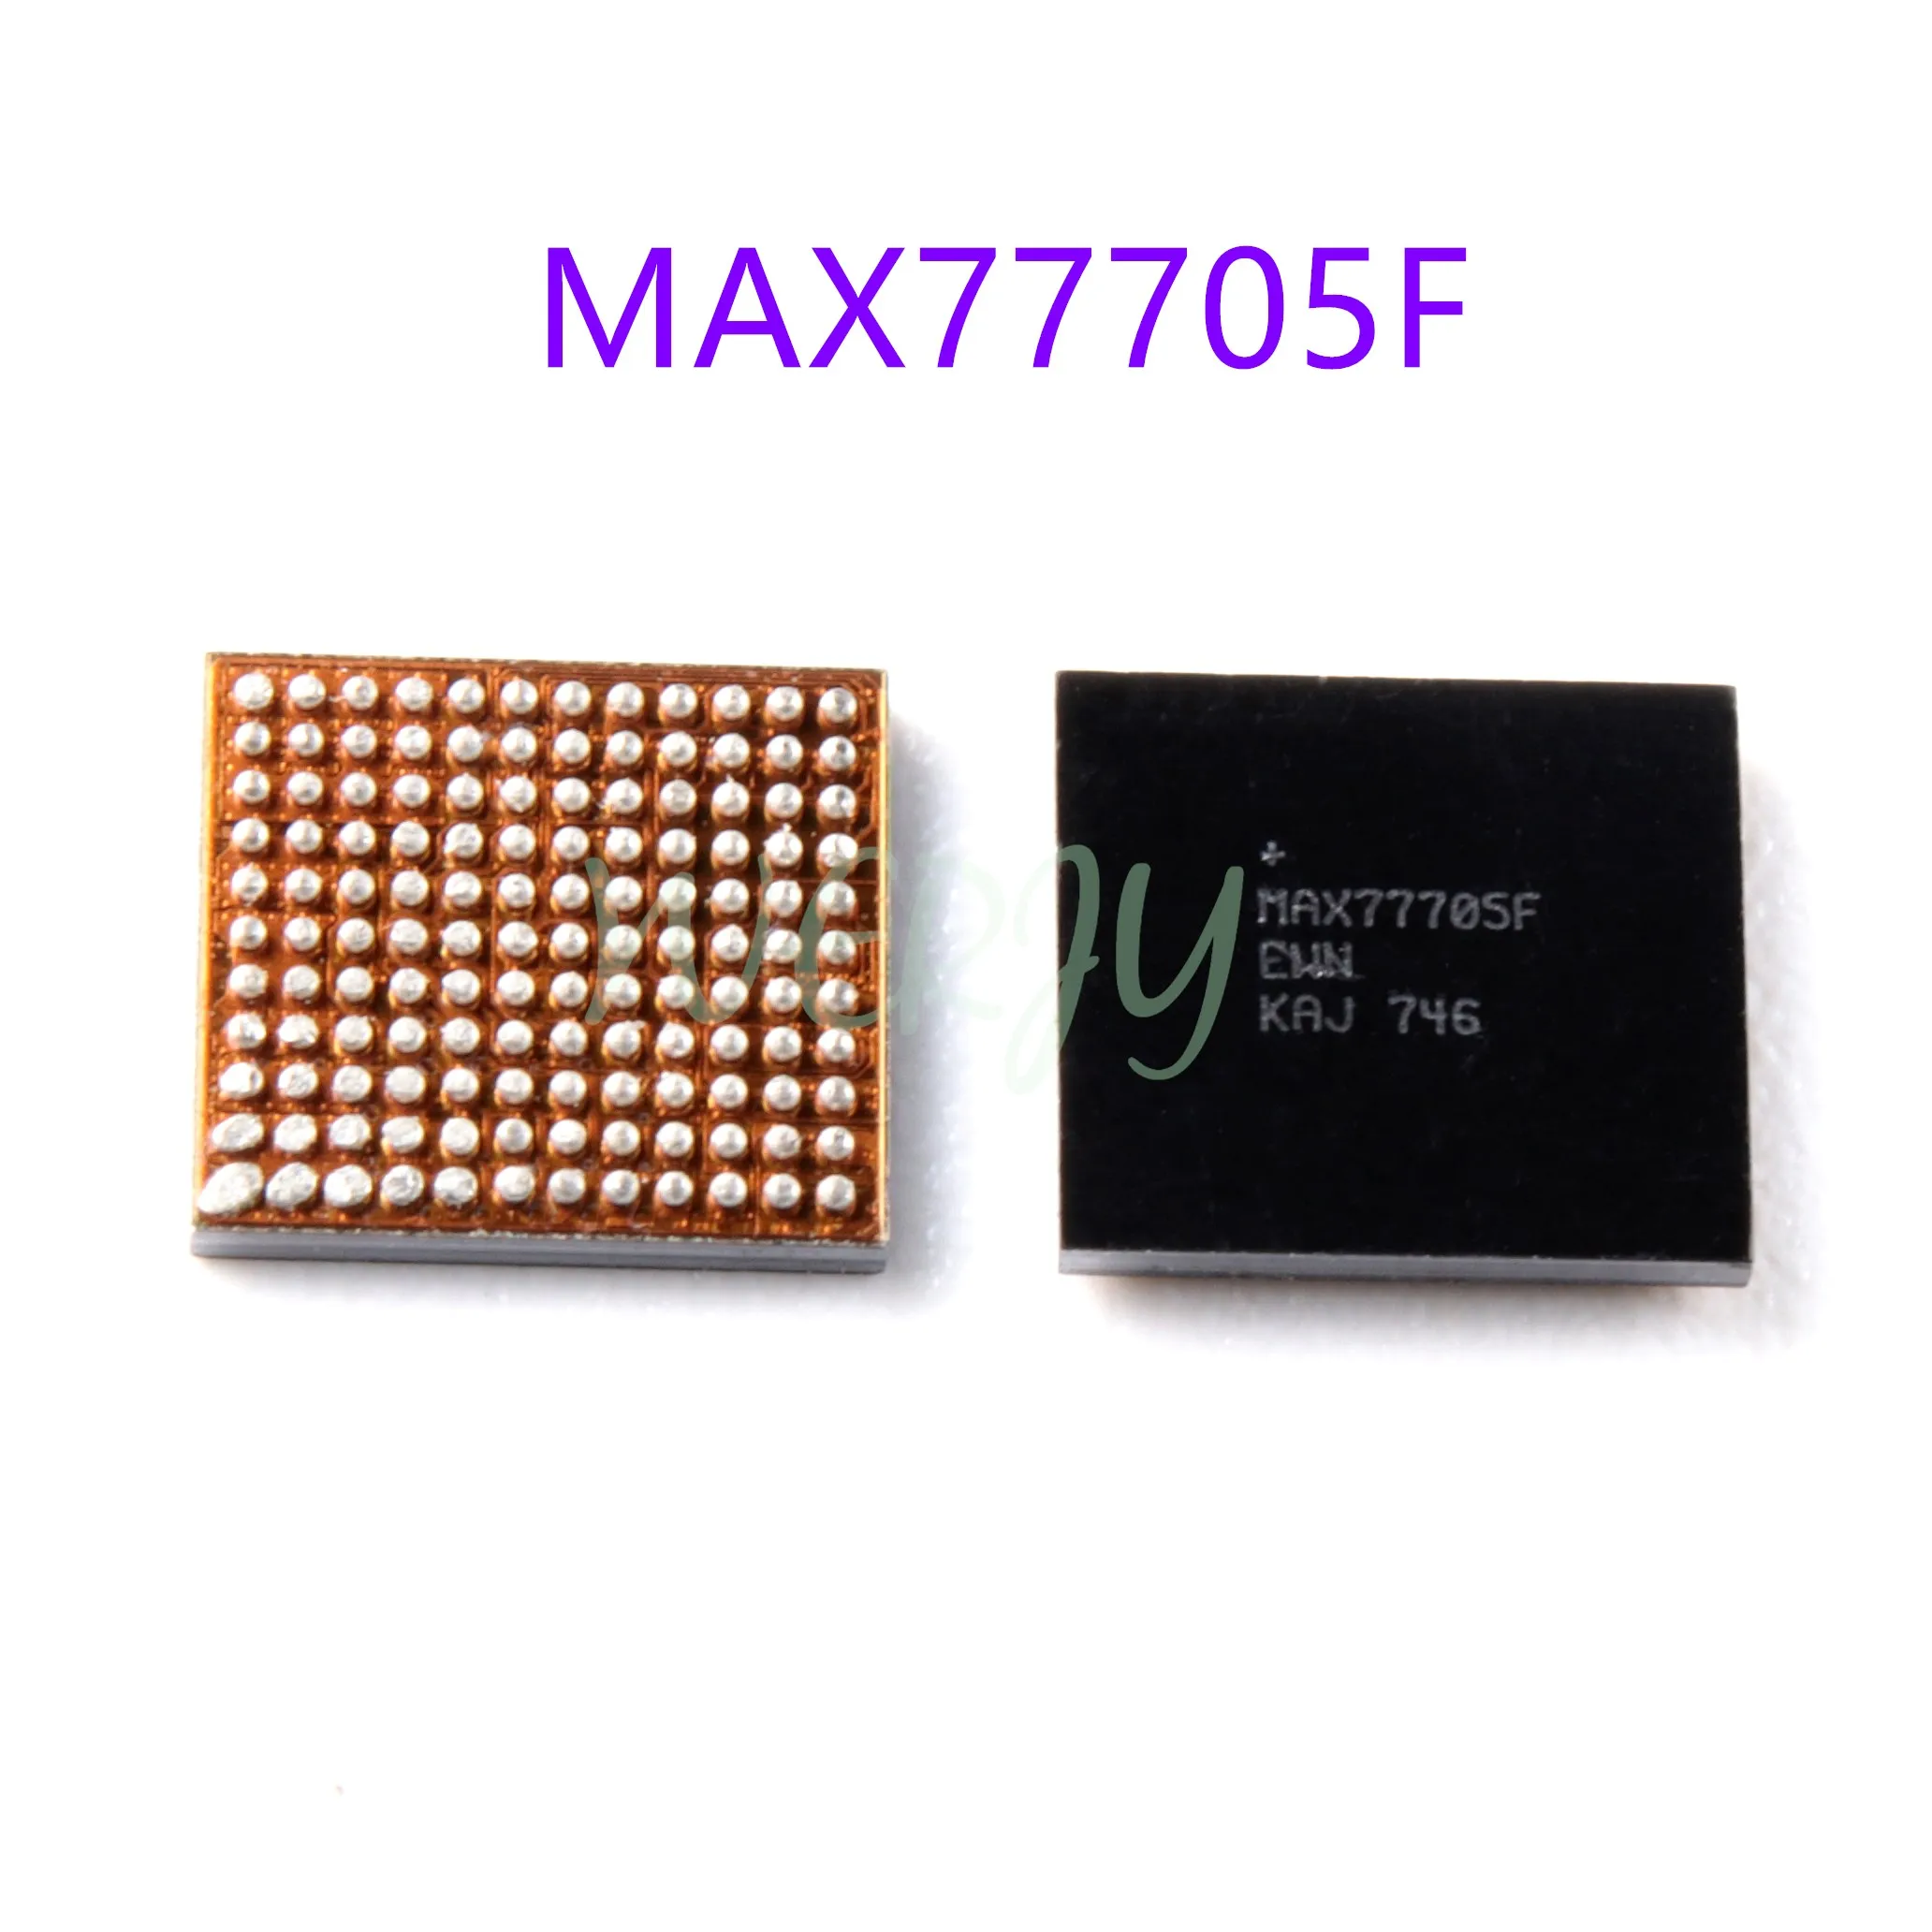 10Pcs/Lot MAX77705F Small Power Management PM IC PMIC Chip For Samsung S9 S9+